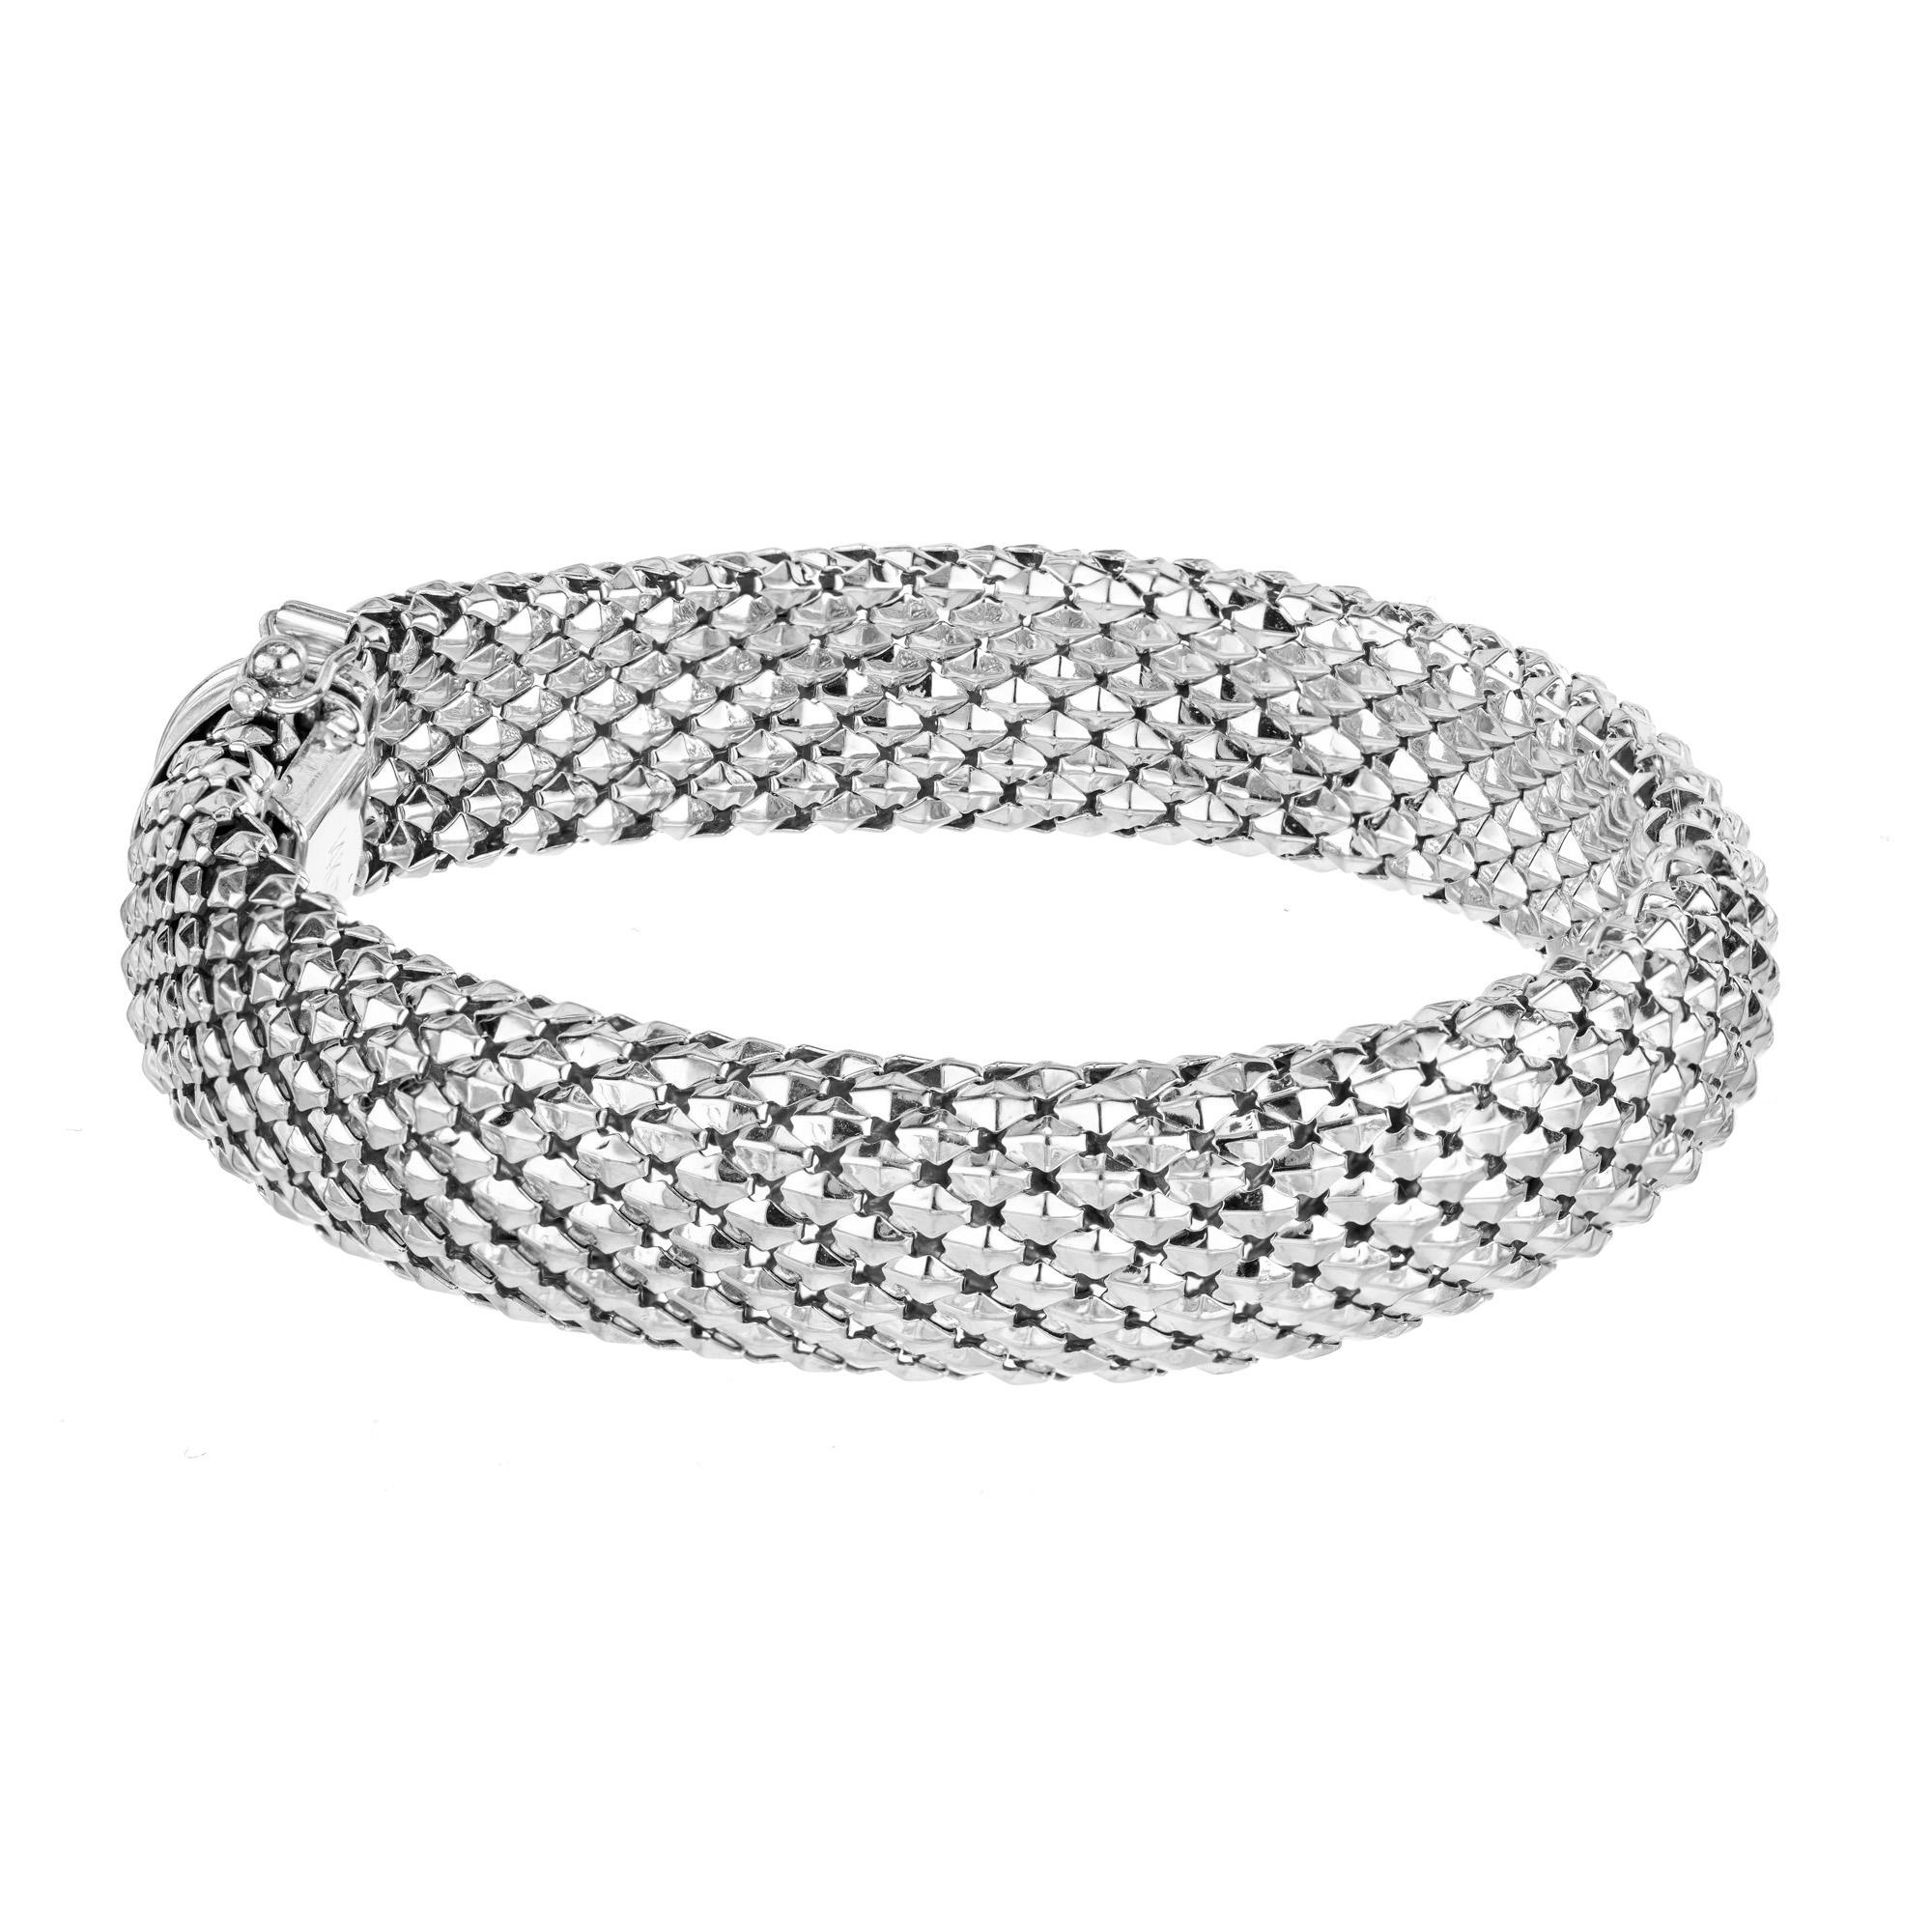 This wonderfully crafted 14k white gold 12.8mm wide domed textured 7.25 inch bracelet is a very modern stylish piece of jewelry. The bracelet features a unique textured design that adds depth and character while its width makes it a bold striking